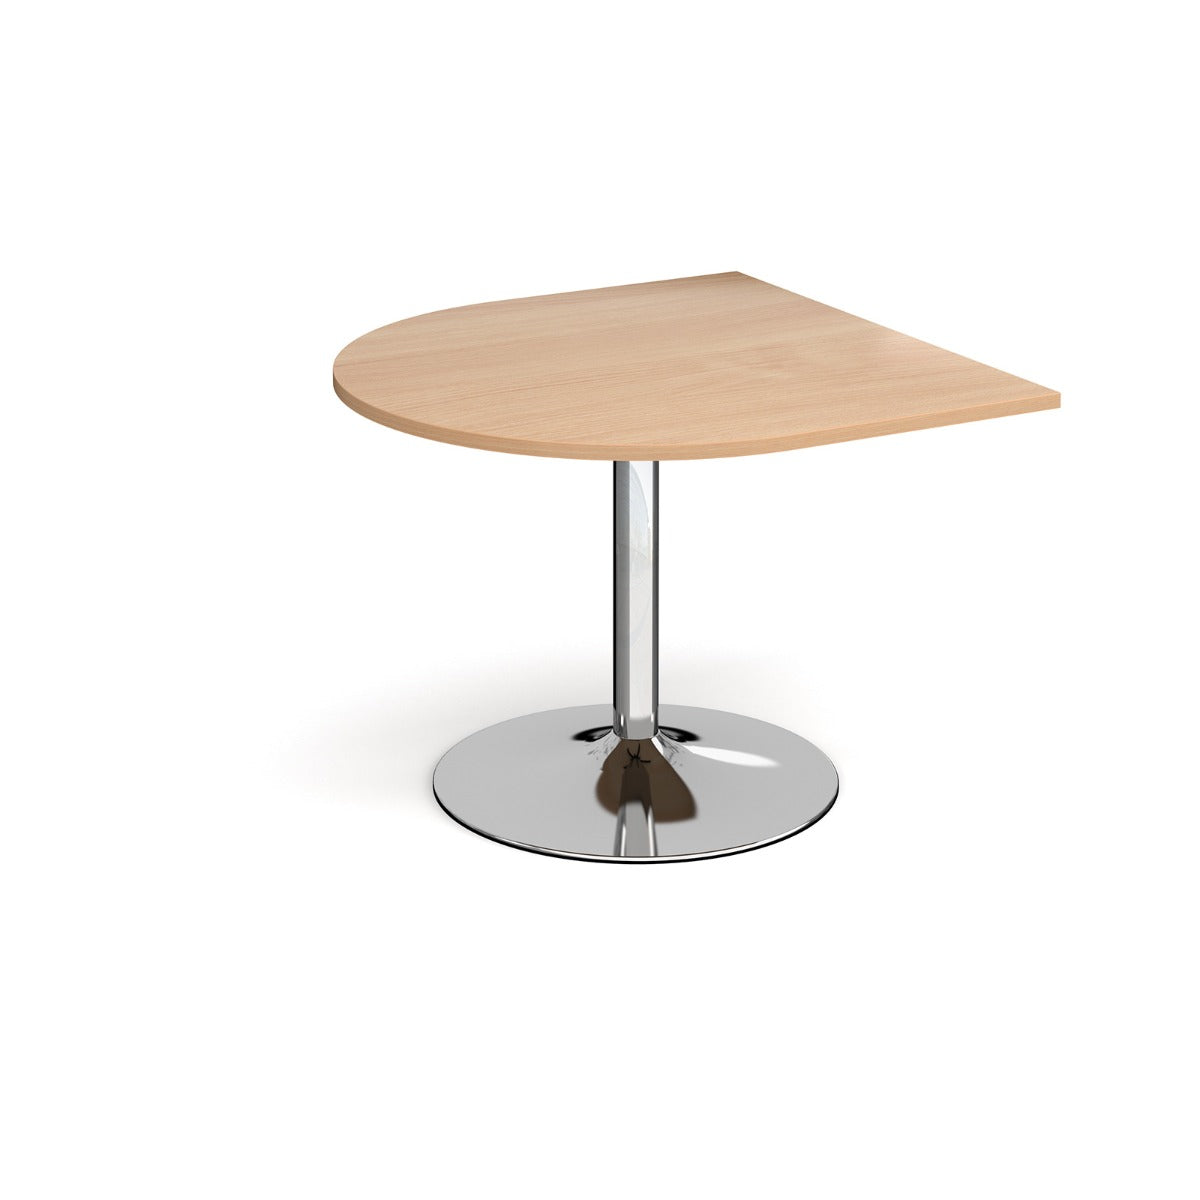 Trumpet Base Radial Extension Boardroom Meeting Table